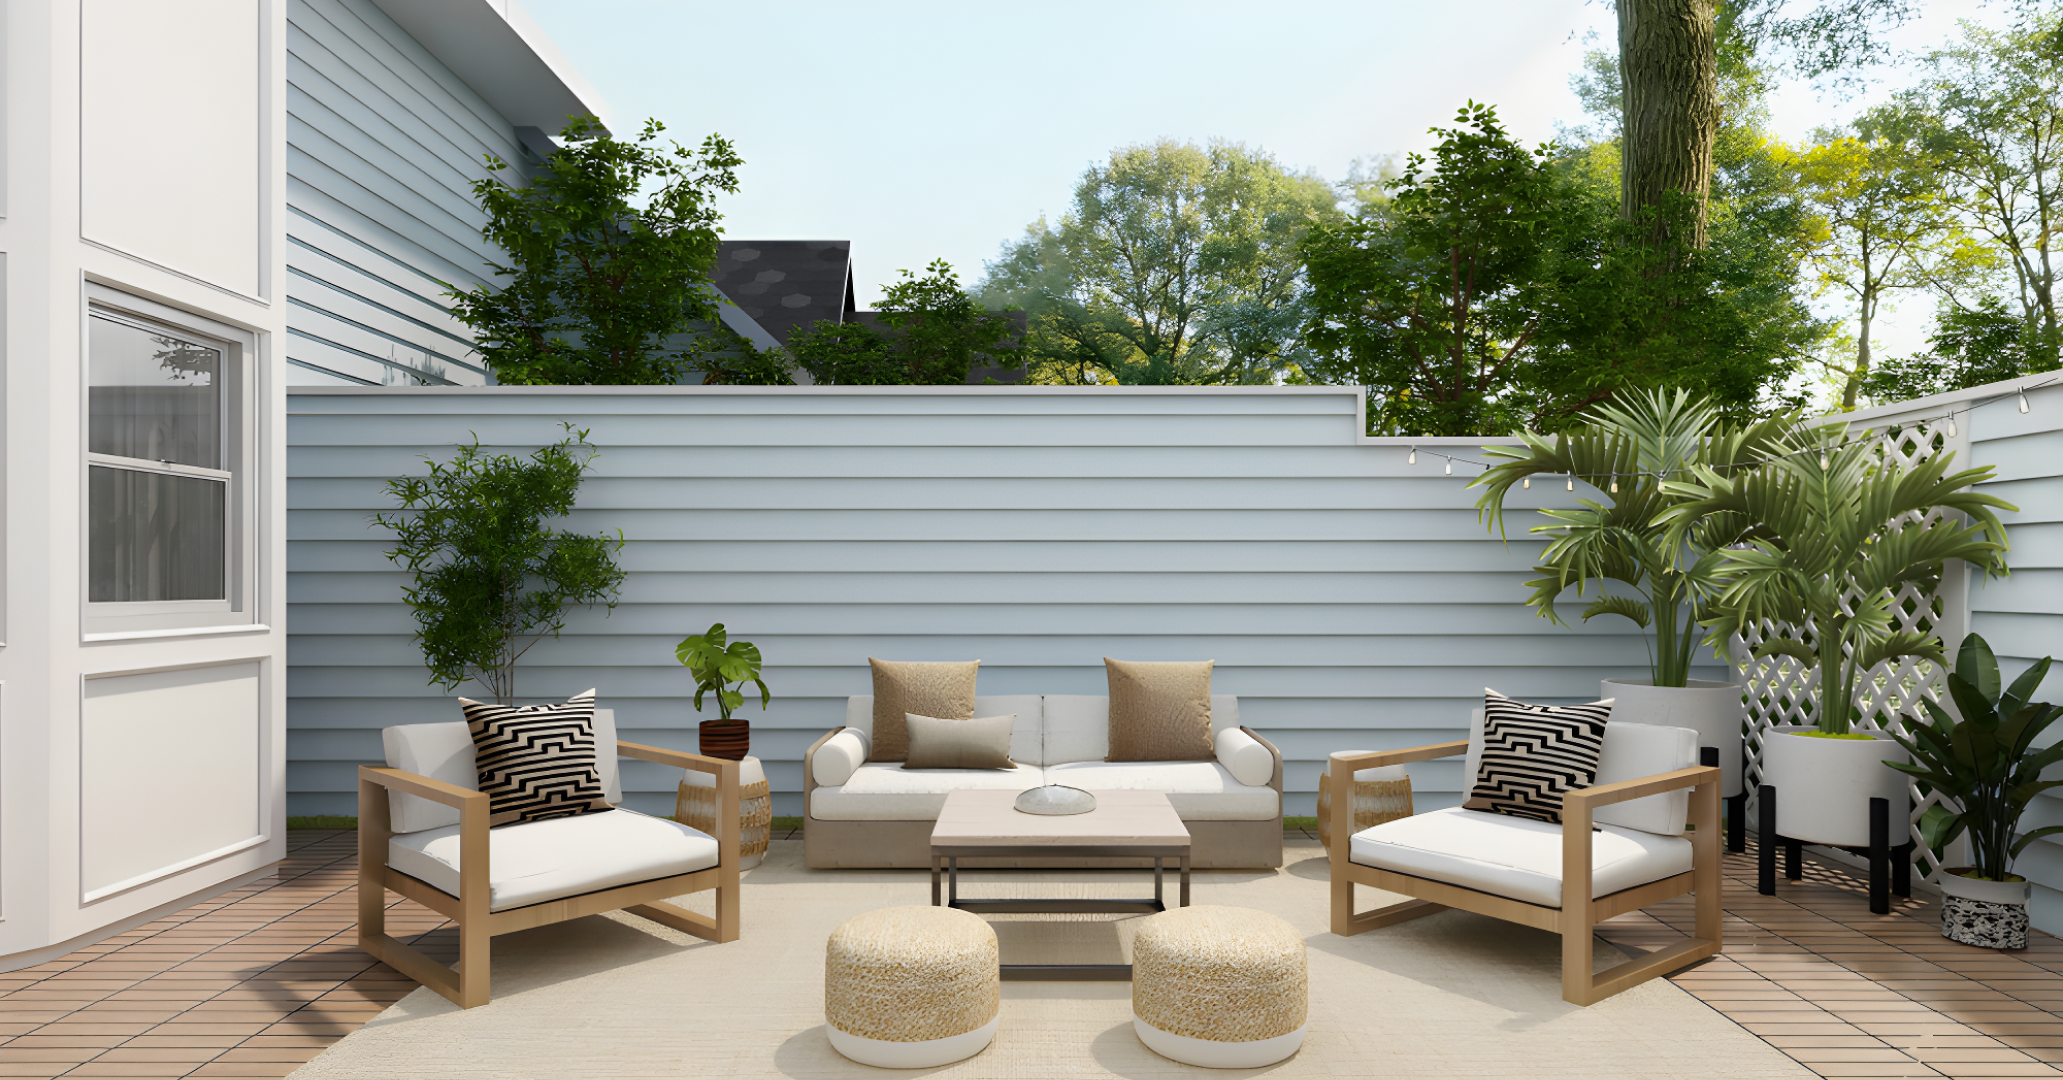 Finding the ideal outdoor furniture begins!